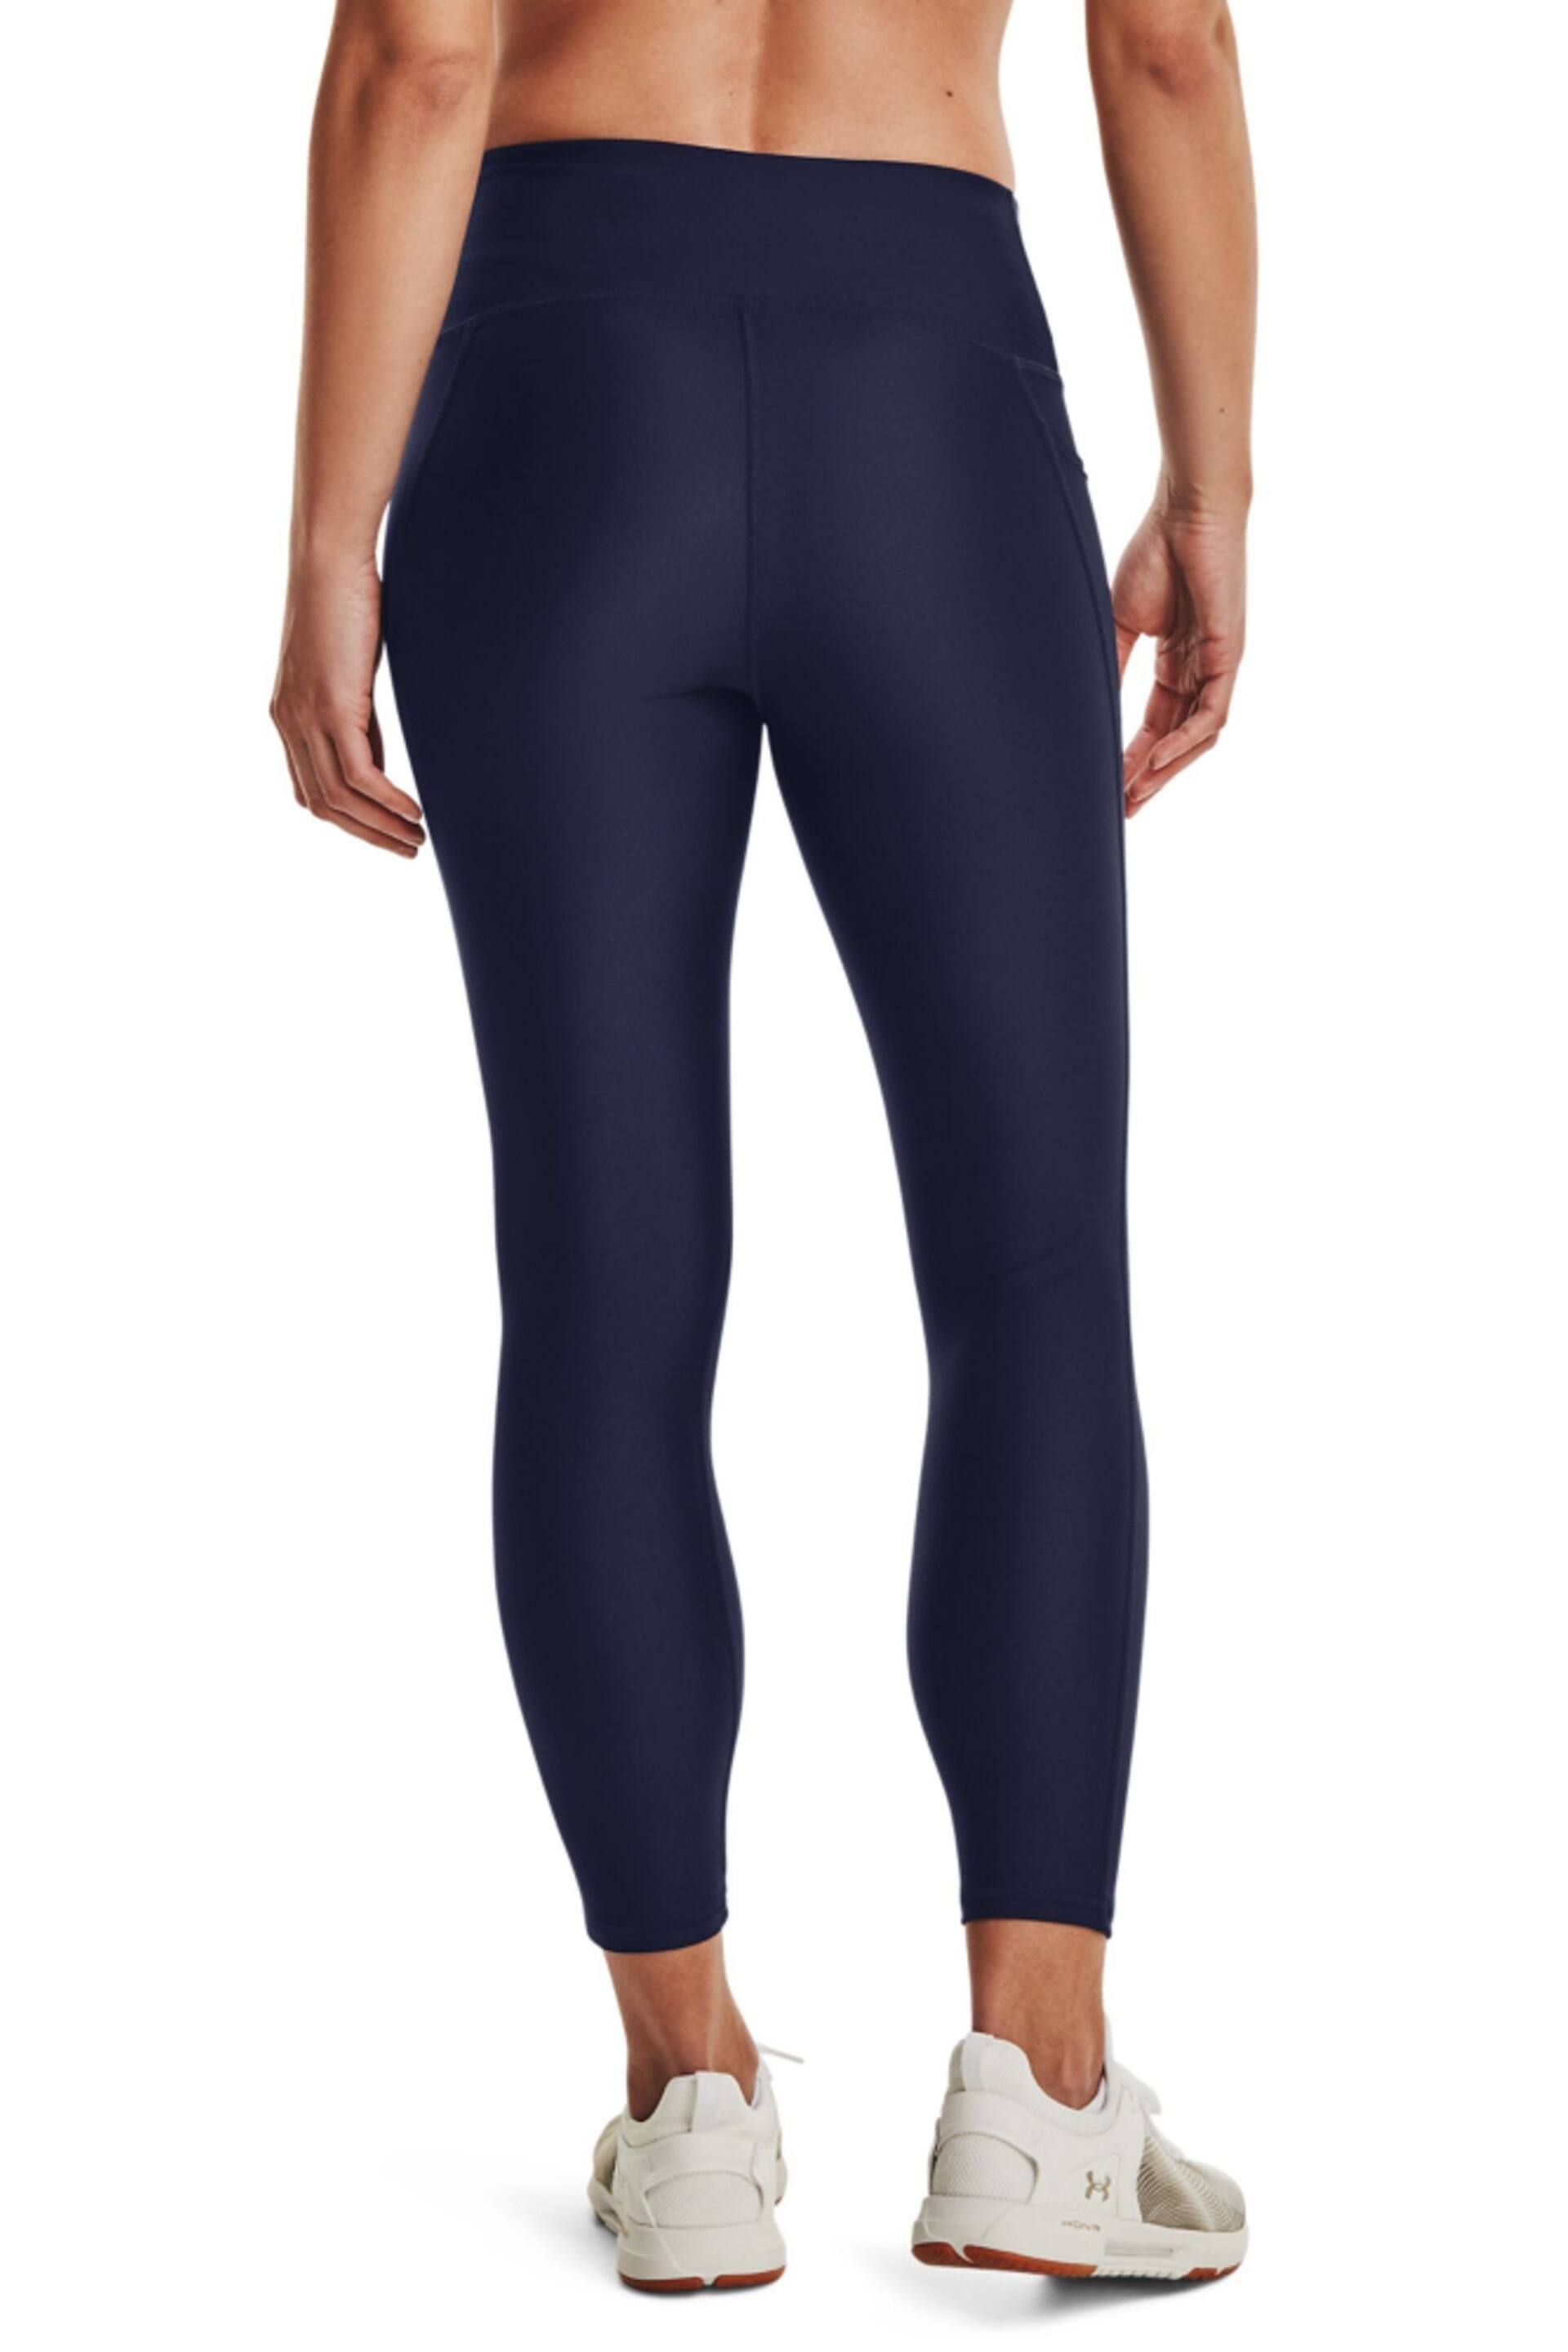 Under Armour High Rise 7/8 Leggings - Image 2 of 6